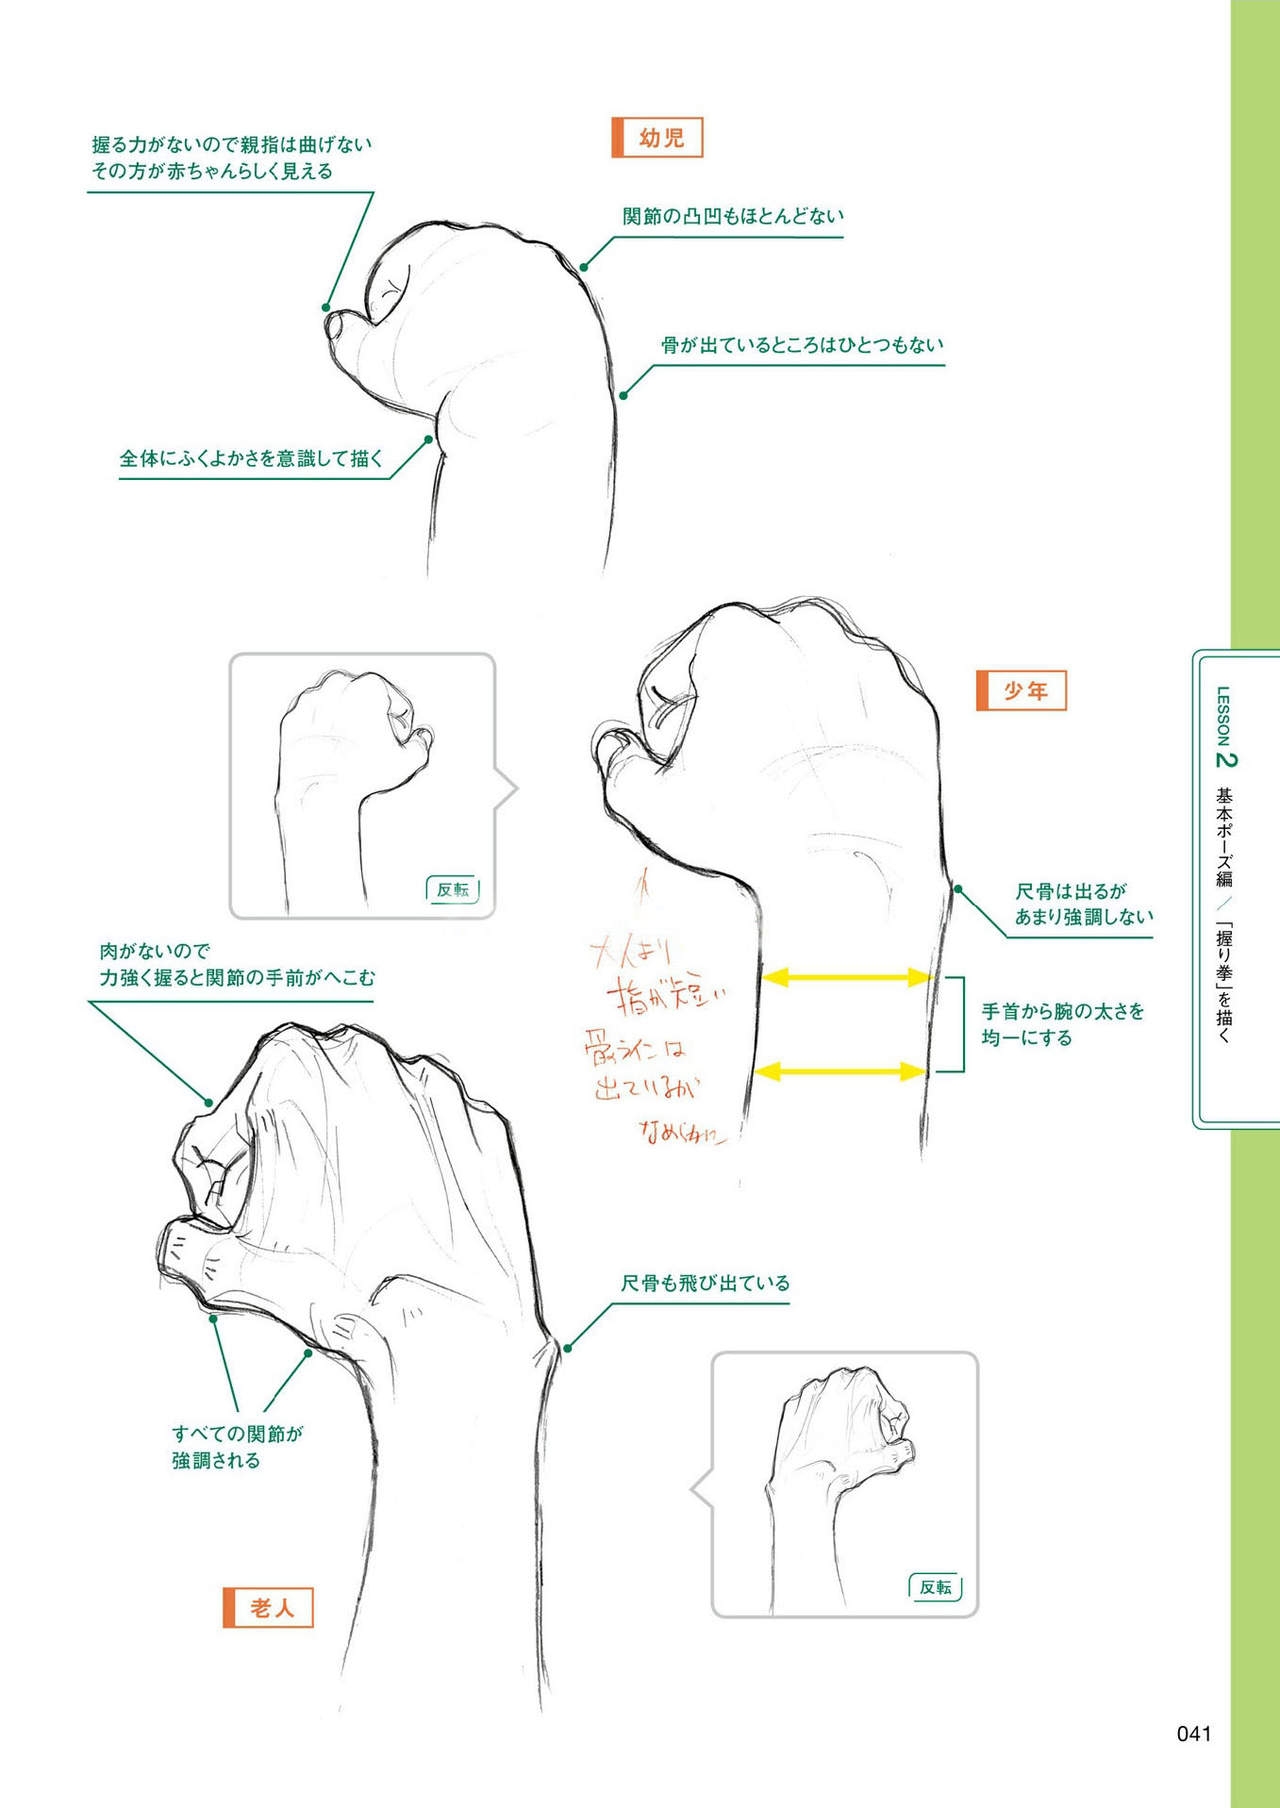 How to draw hands 41